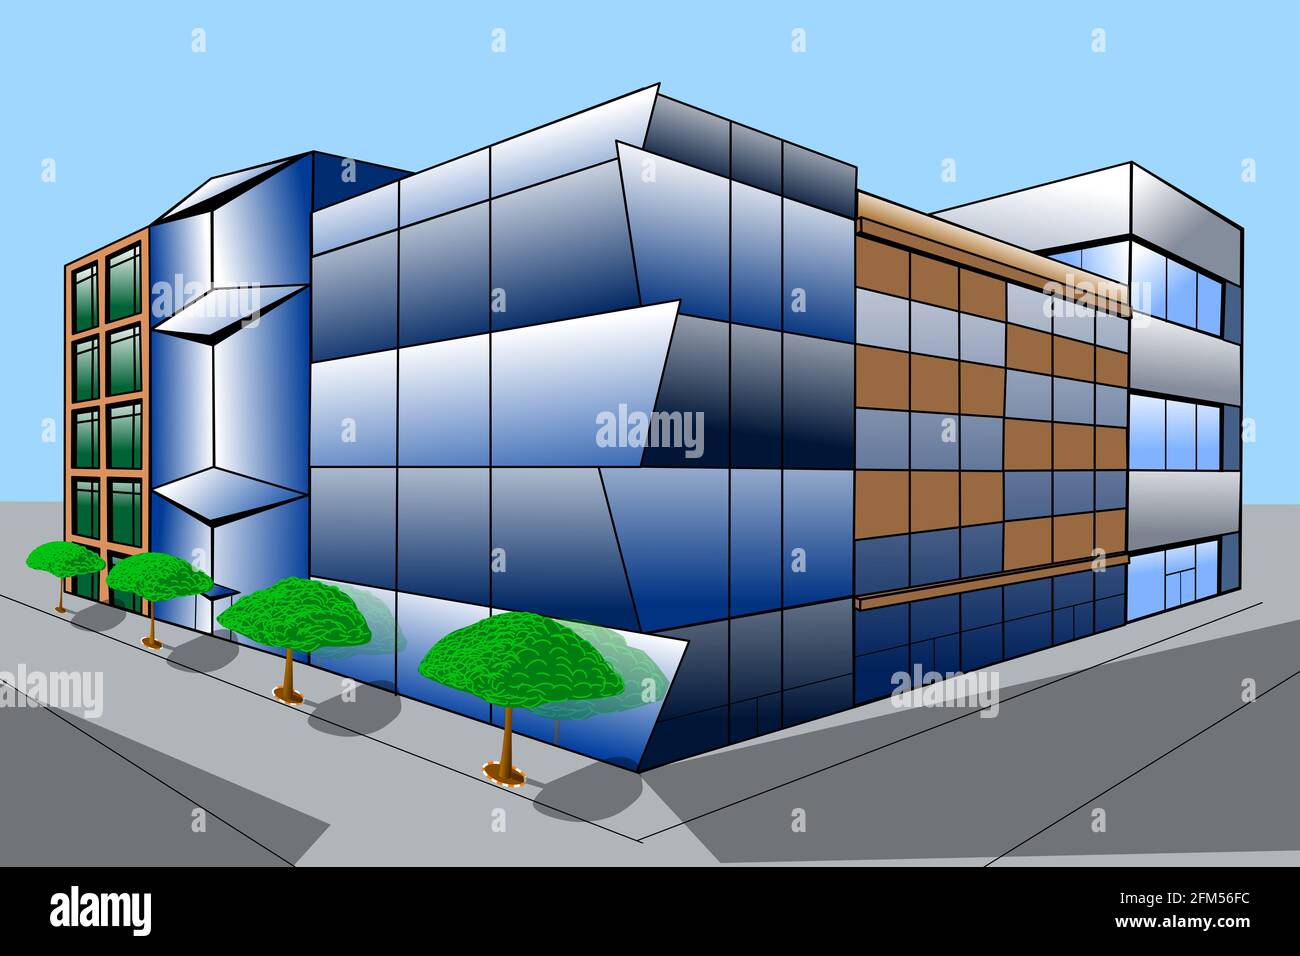 Sketch of Modern Office Building Business architecture, apartment and office urban landscape, development and real estate business concept Stock Photo